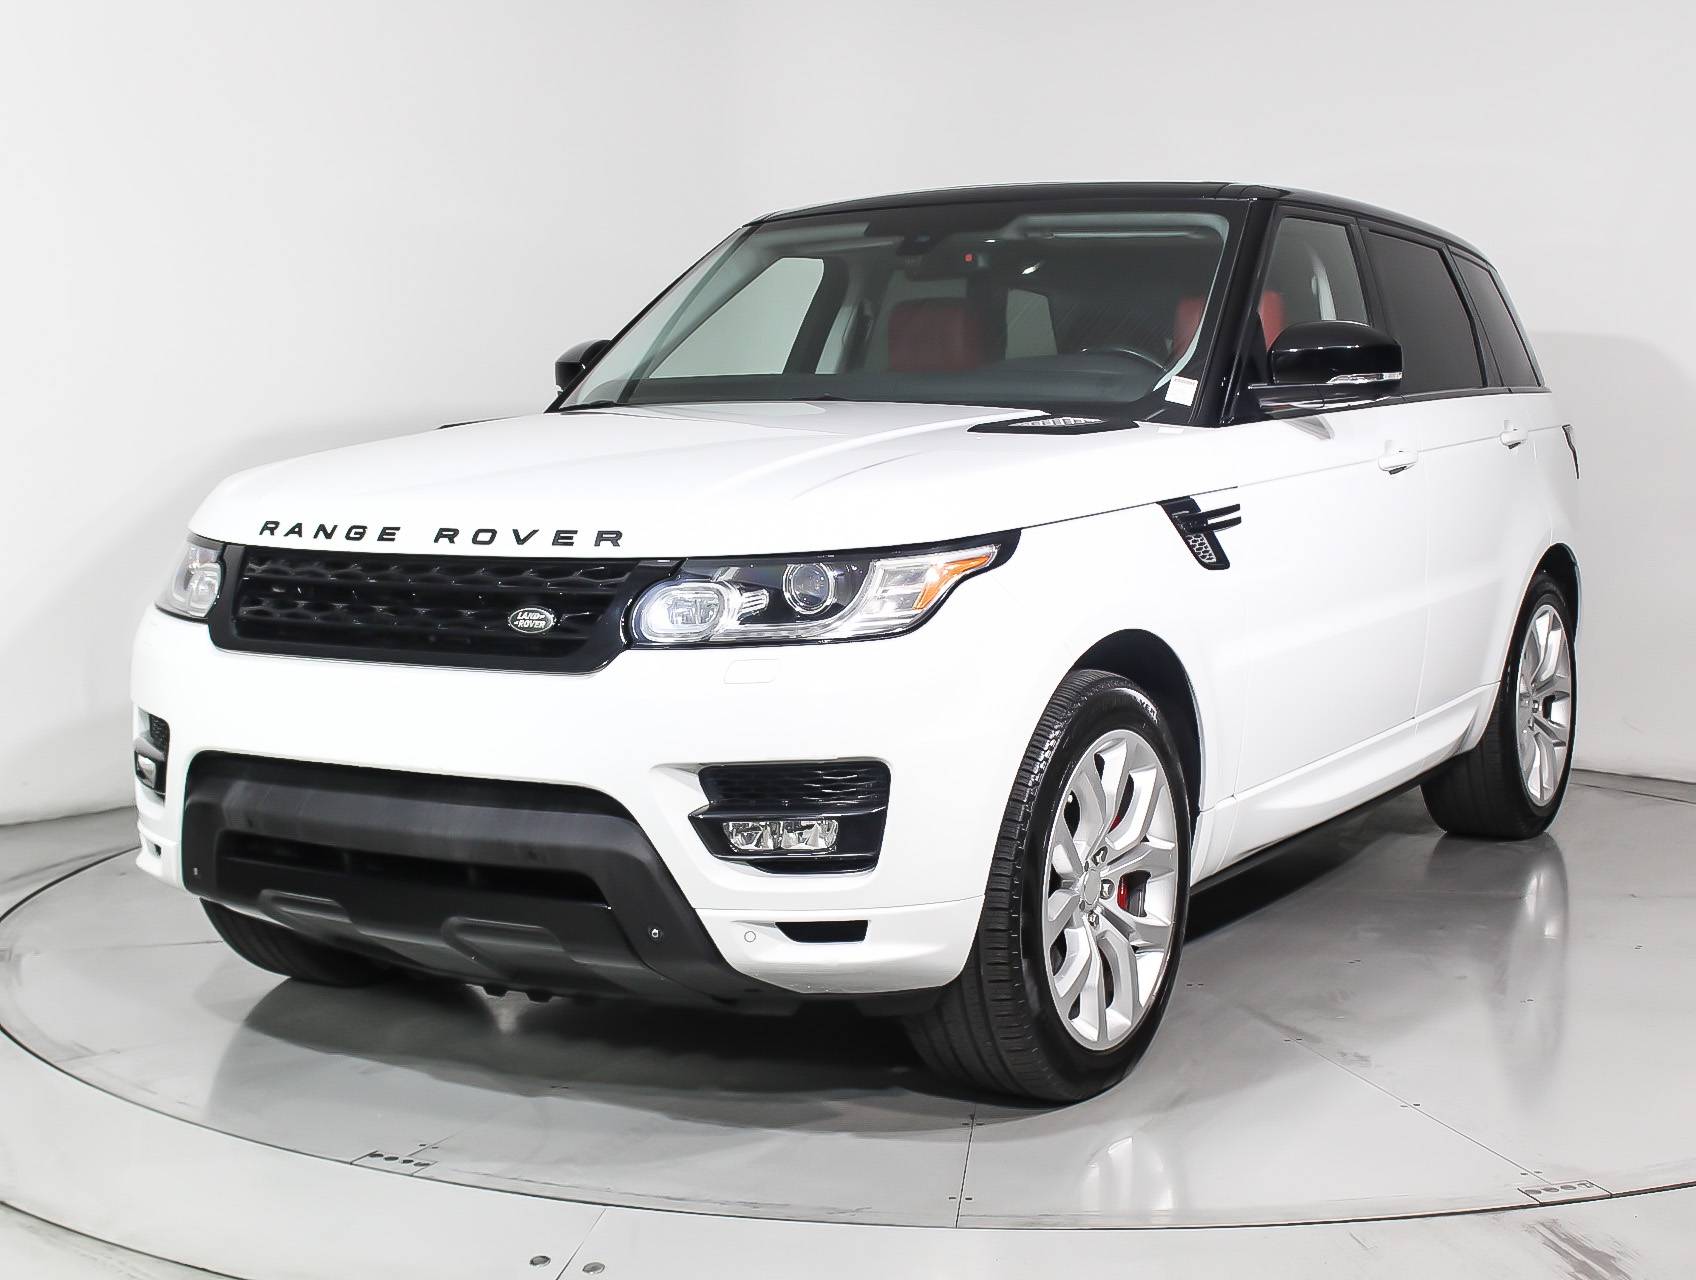 Groen Vooravond Turbulentie Used 2014 LAND ROVER RANGE ROVER SPORT AUTOBIOGRAPHY for sale in MIAMI |  98695